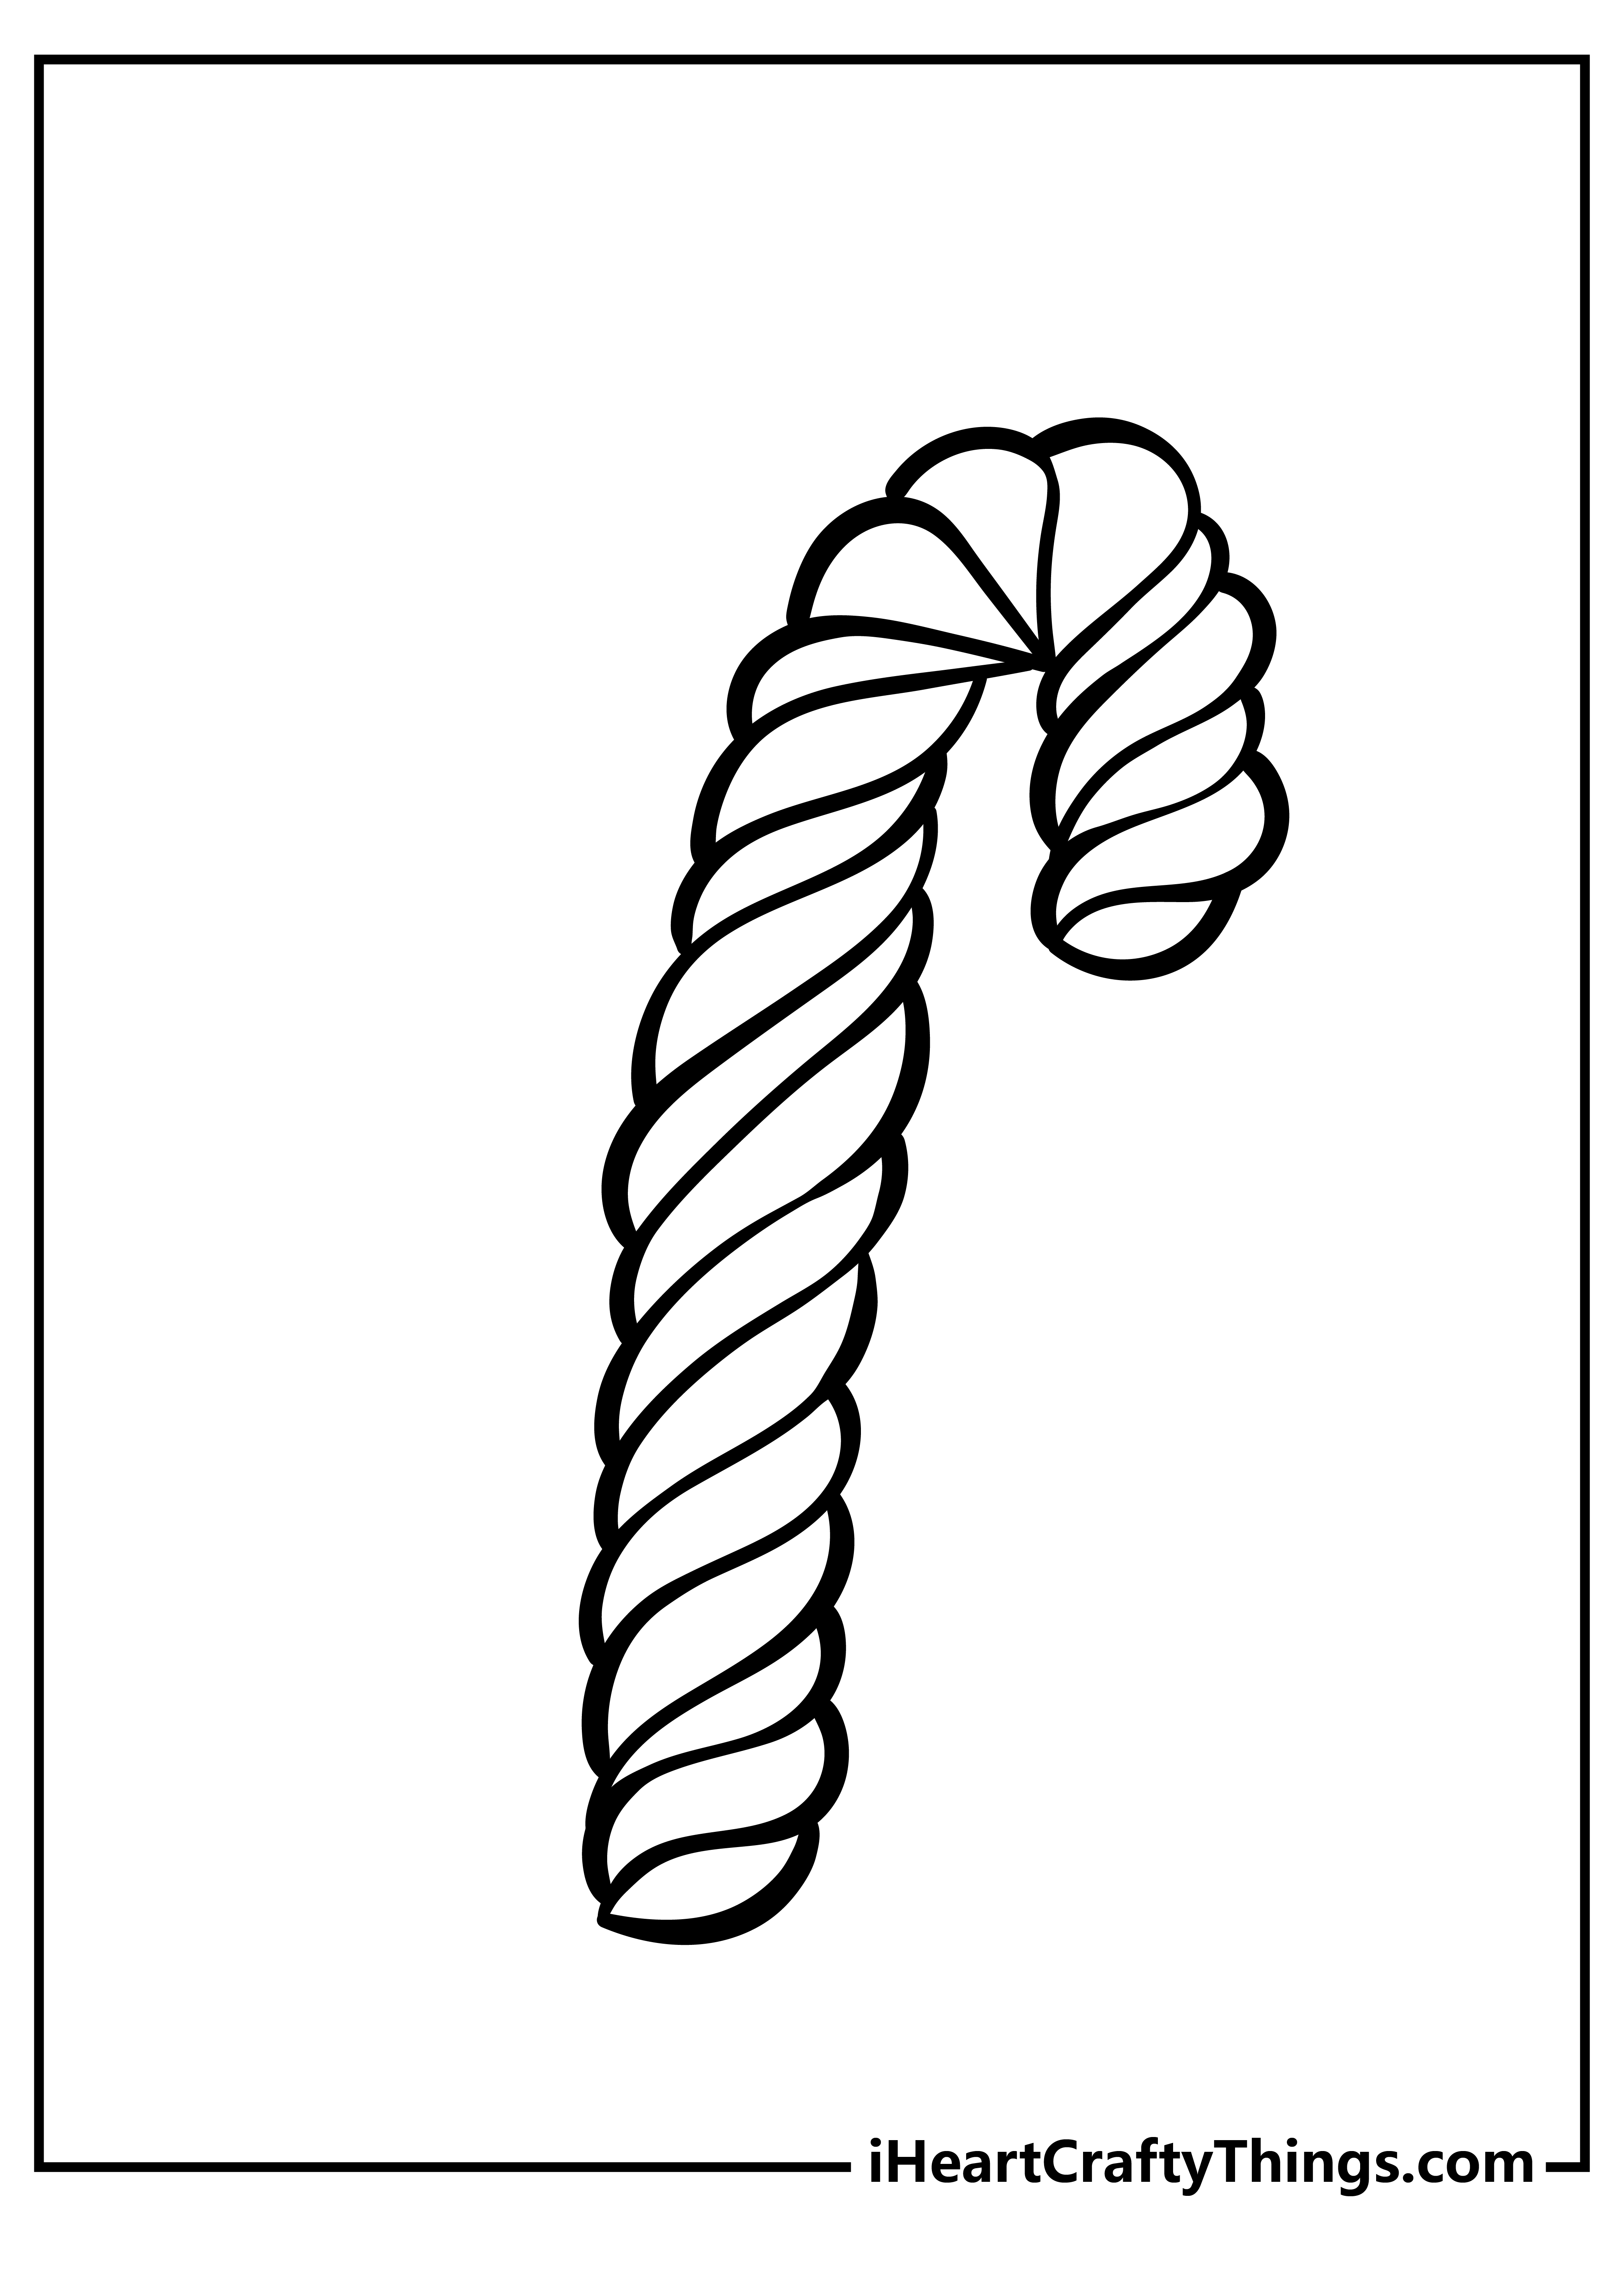 Candy Cane Coloring Pages for kids free download